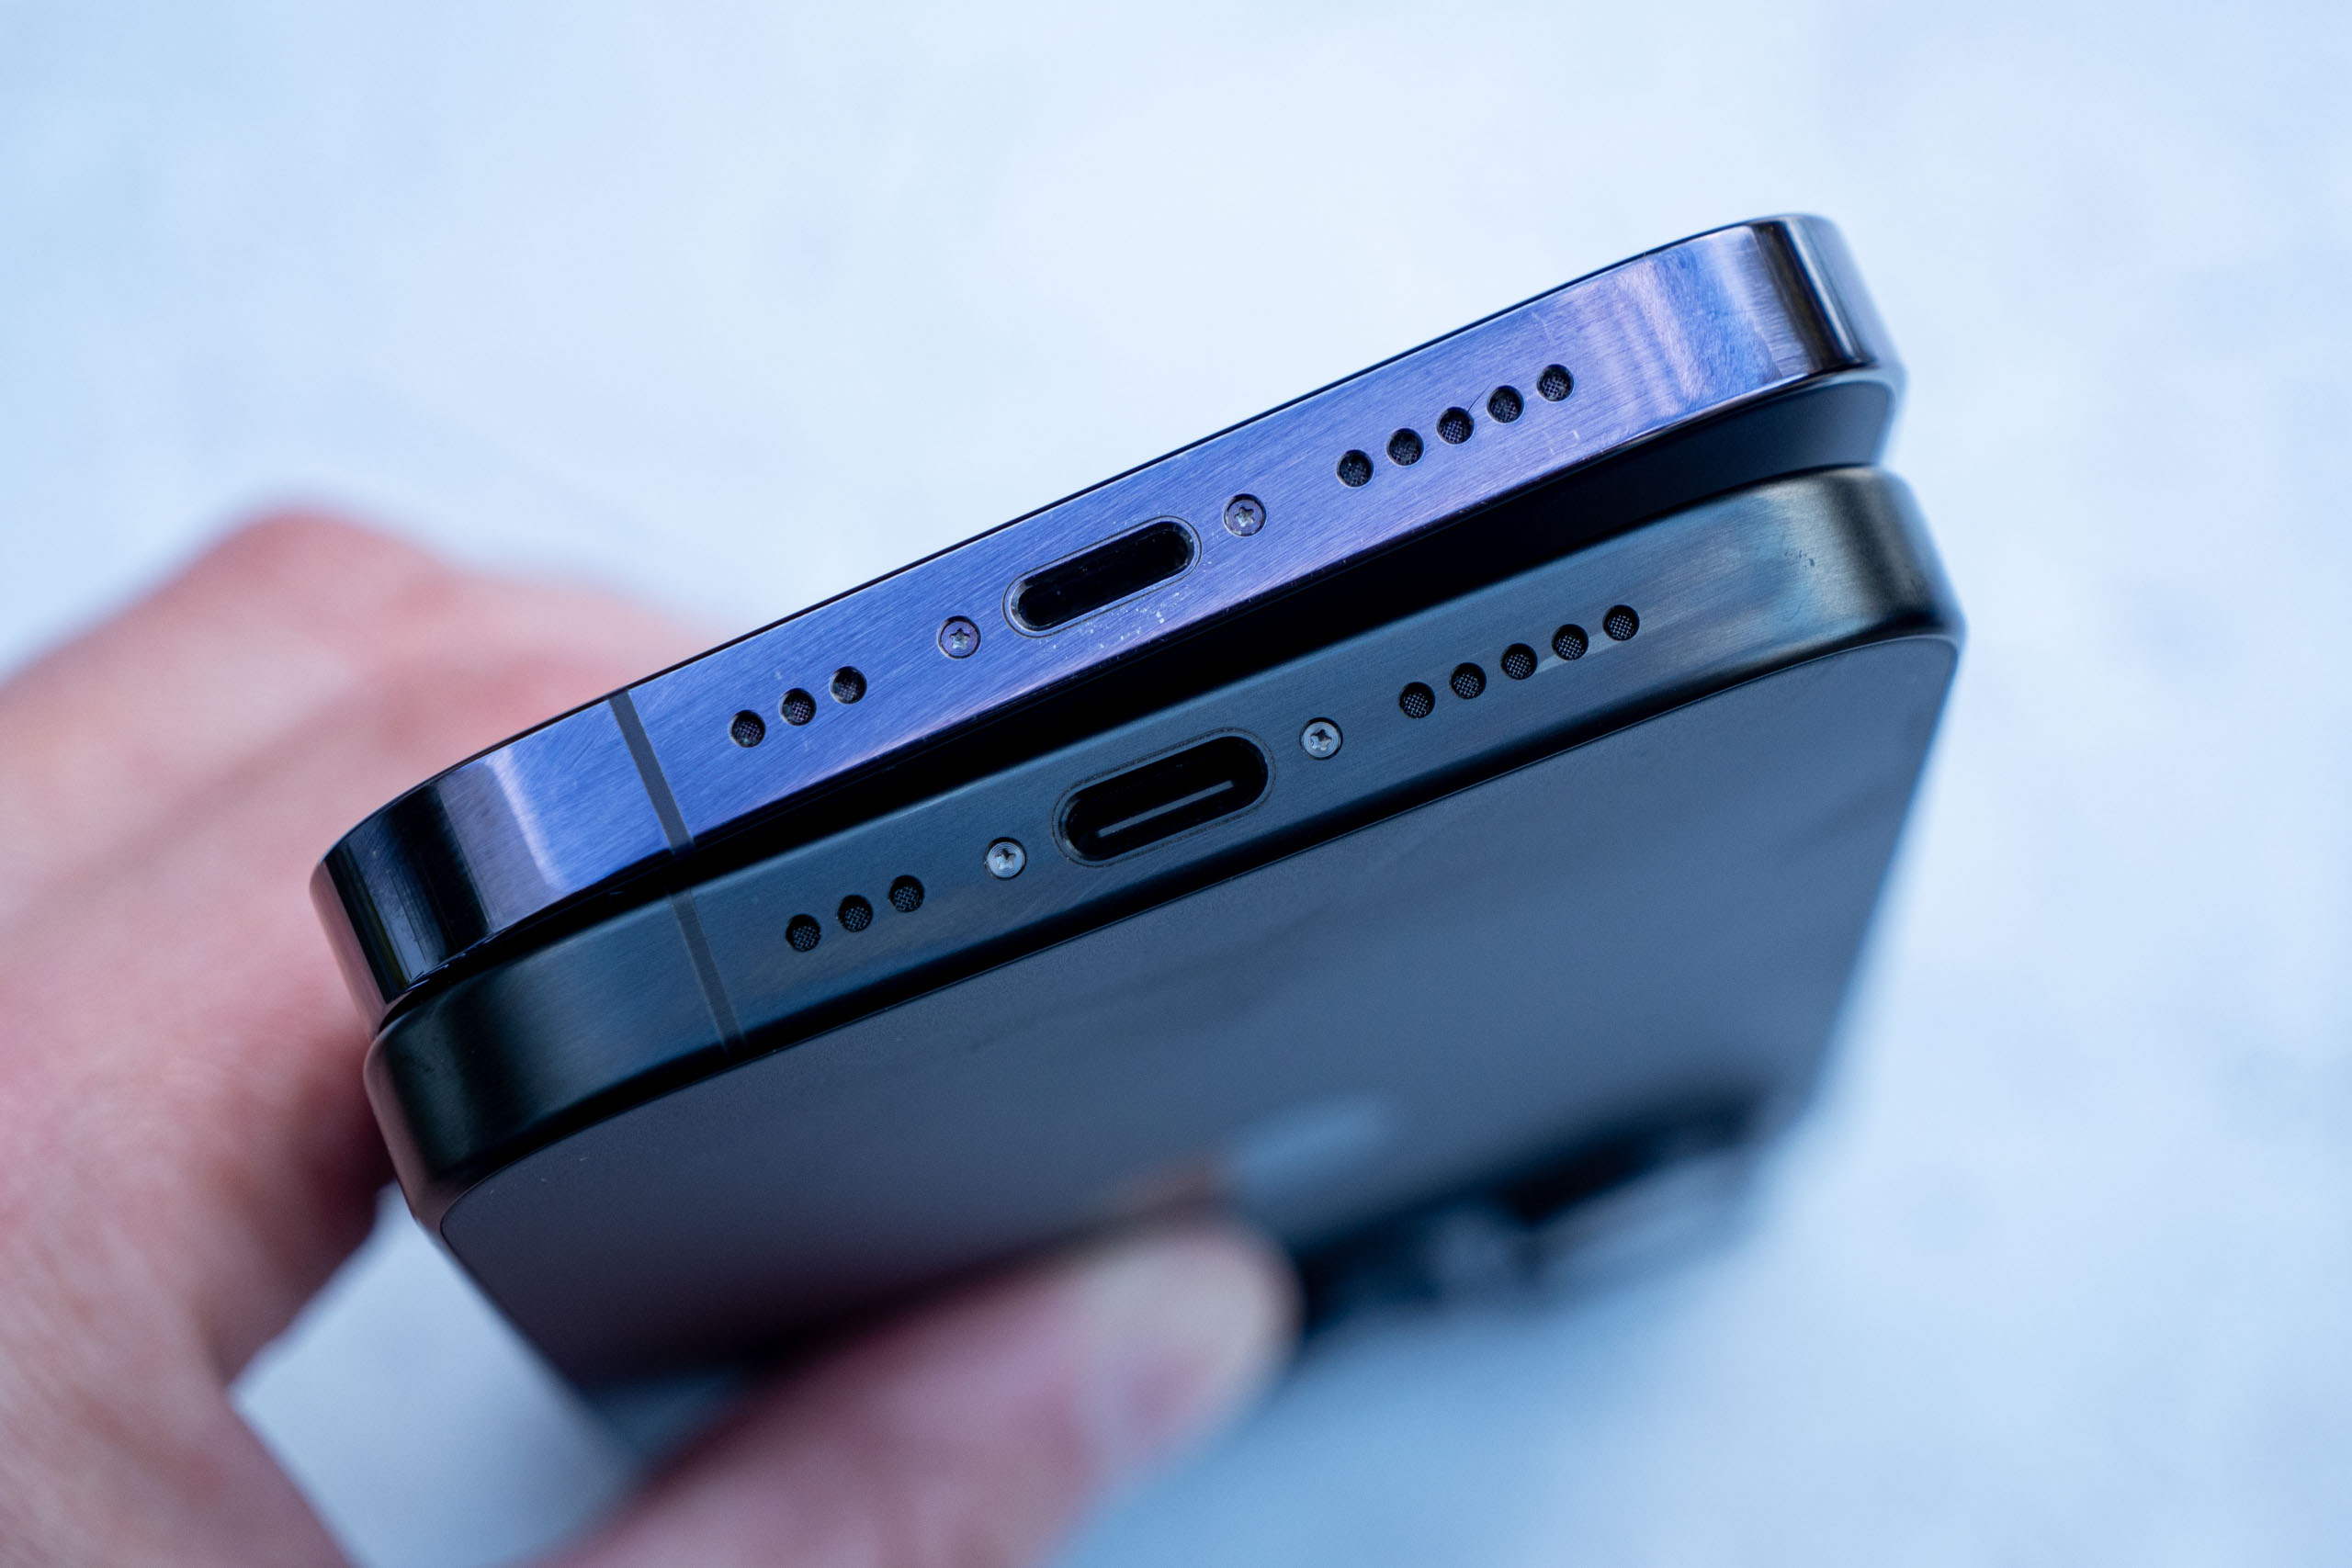 The iPhone 15 Pro – seen at the bottom here – has a USB-C charging socket, rather than a Lightning socket. 